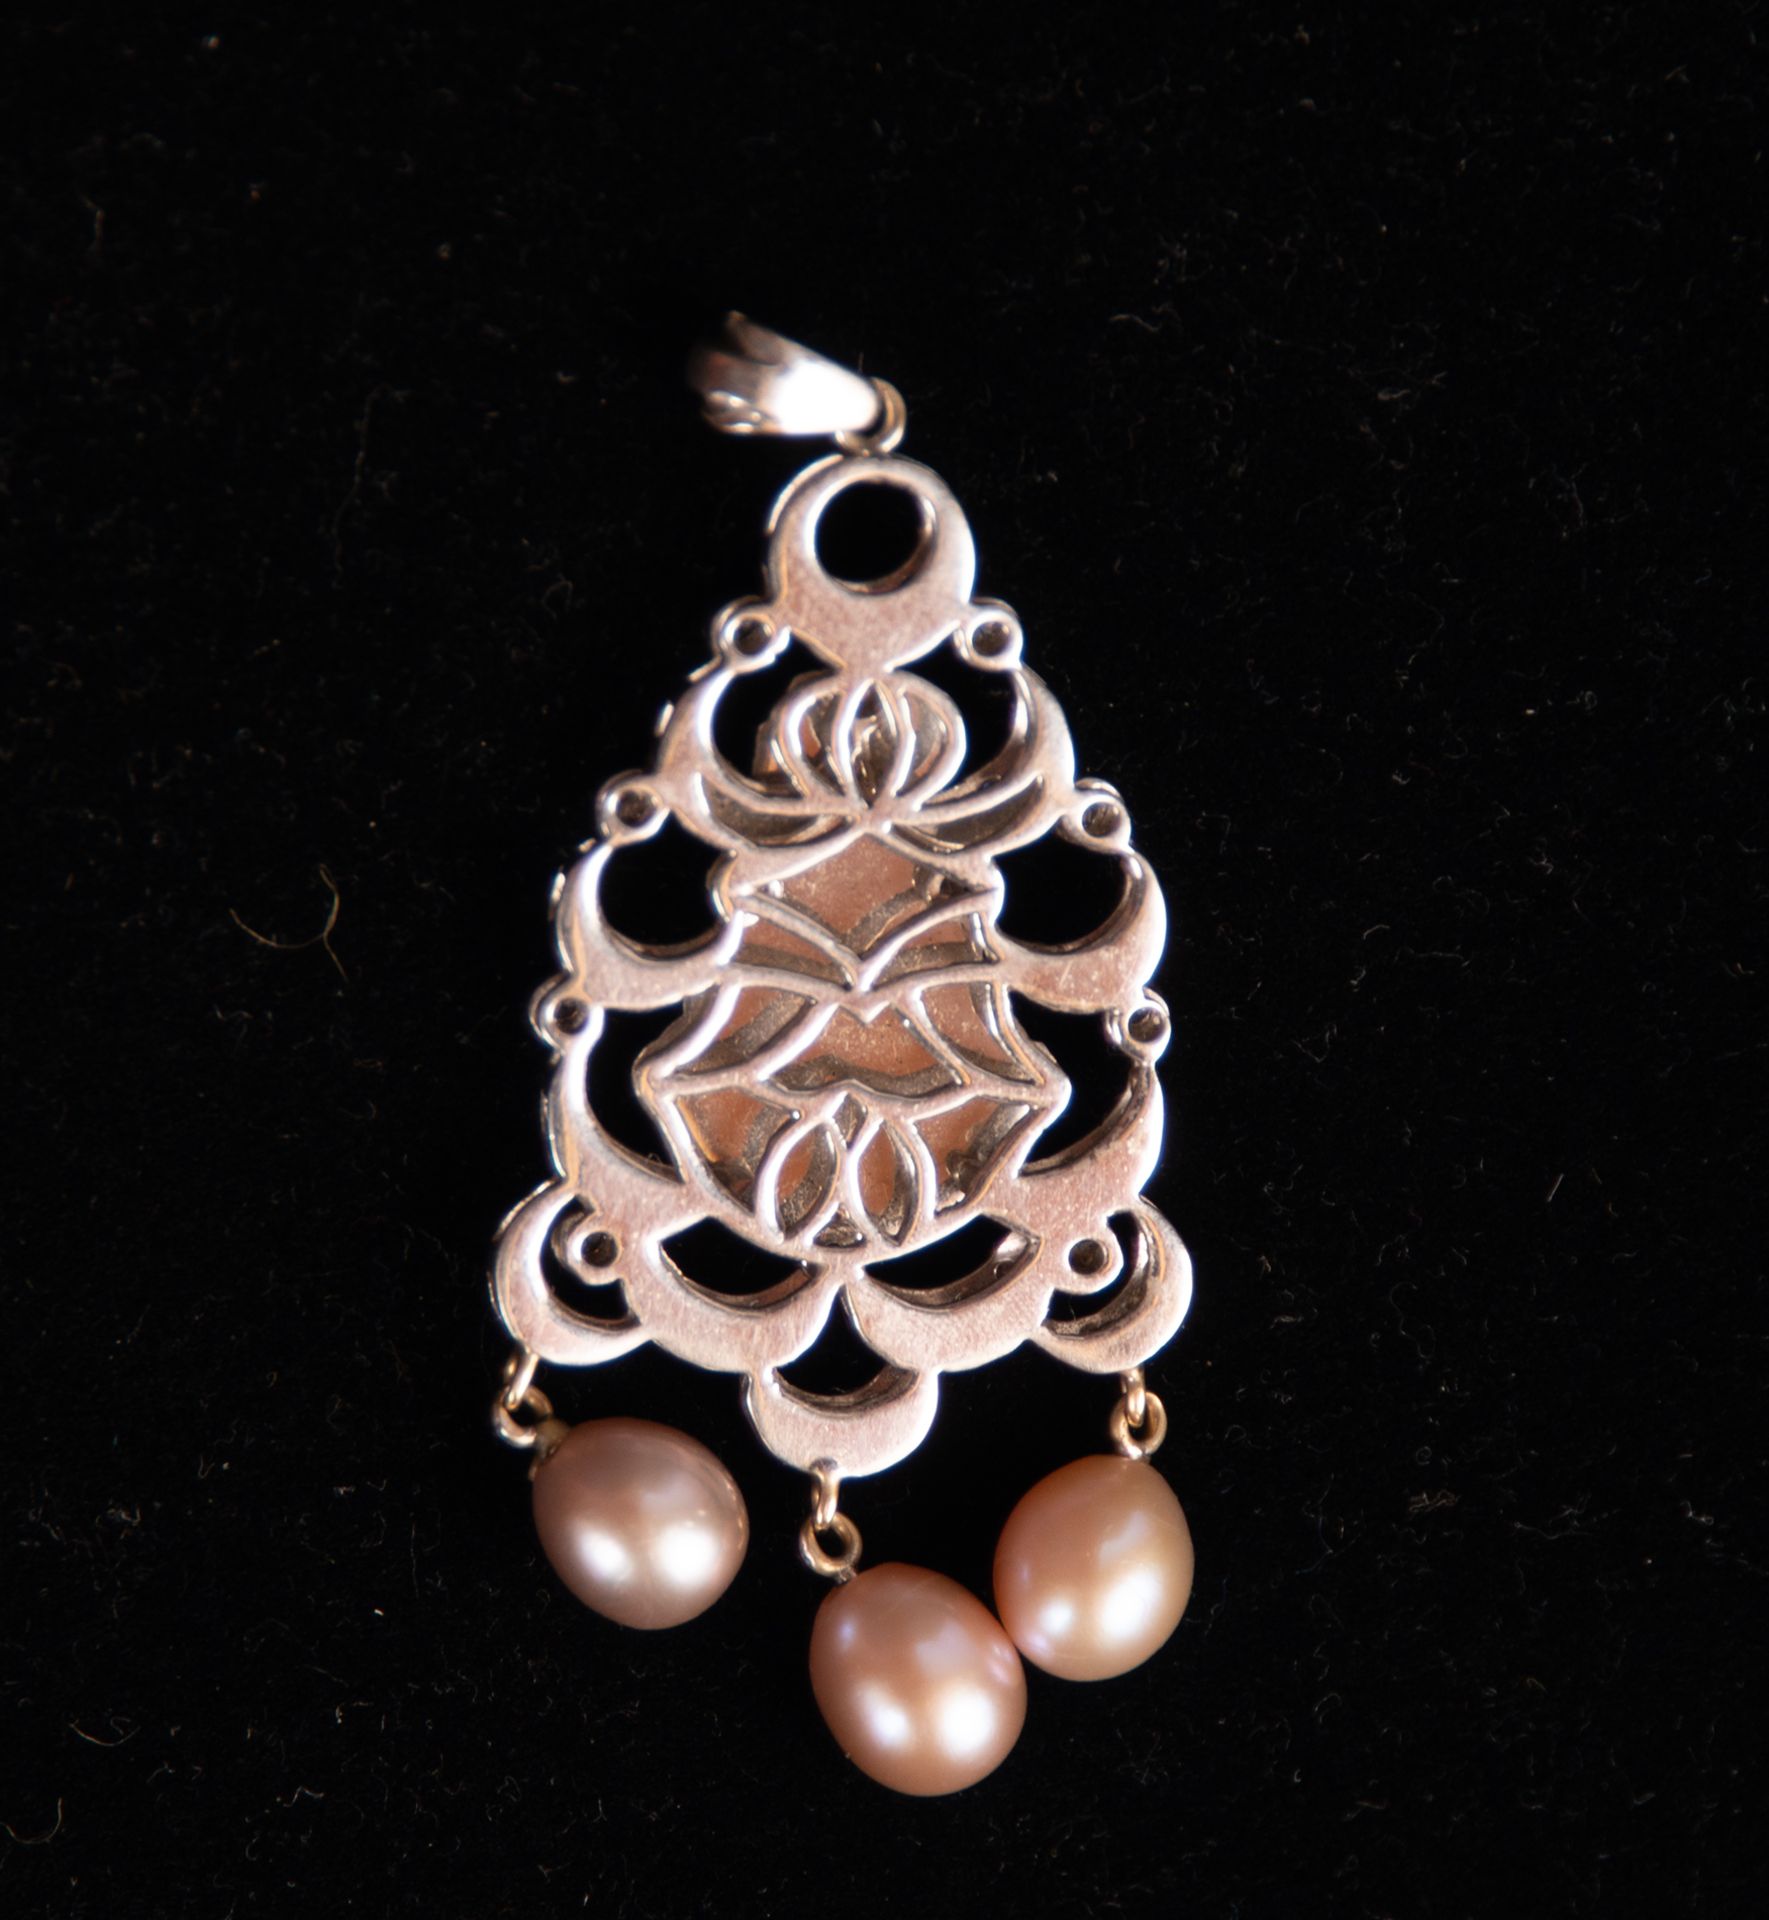 Pendant of the Virgen del Rocío mounted in White Gold, Pearls and Diamonds - Bild 4 aus 4